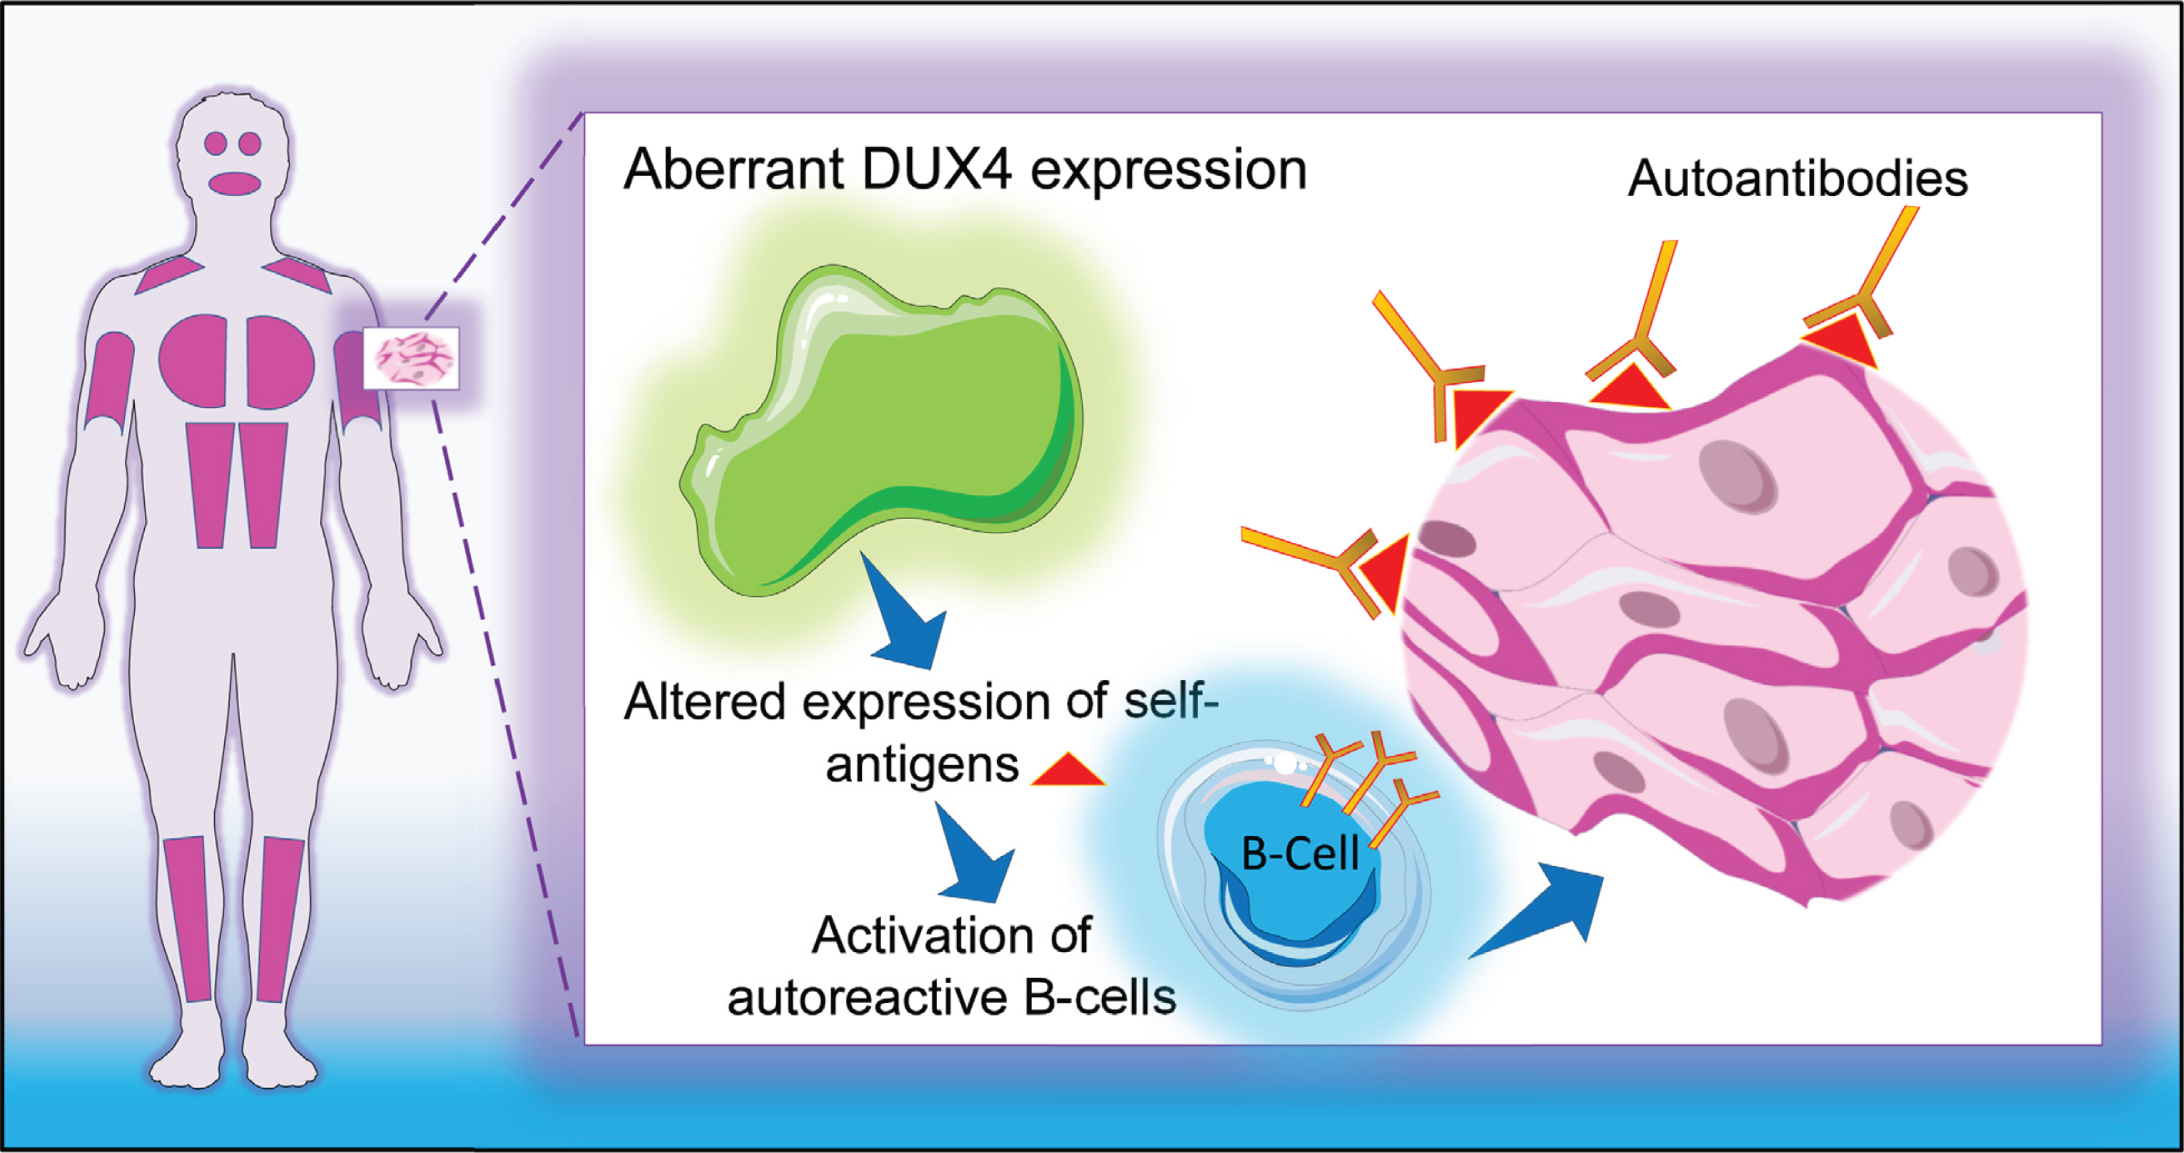 Graphical representation of study hypothesis. DUX4-induced aberrant expression of genes triggers a sustained autoimmune reaction against skeletal muscle cells.